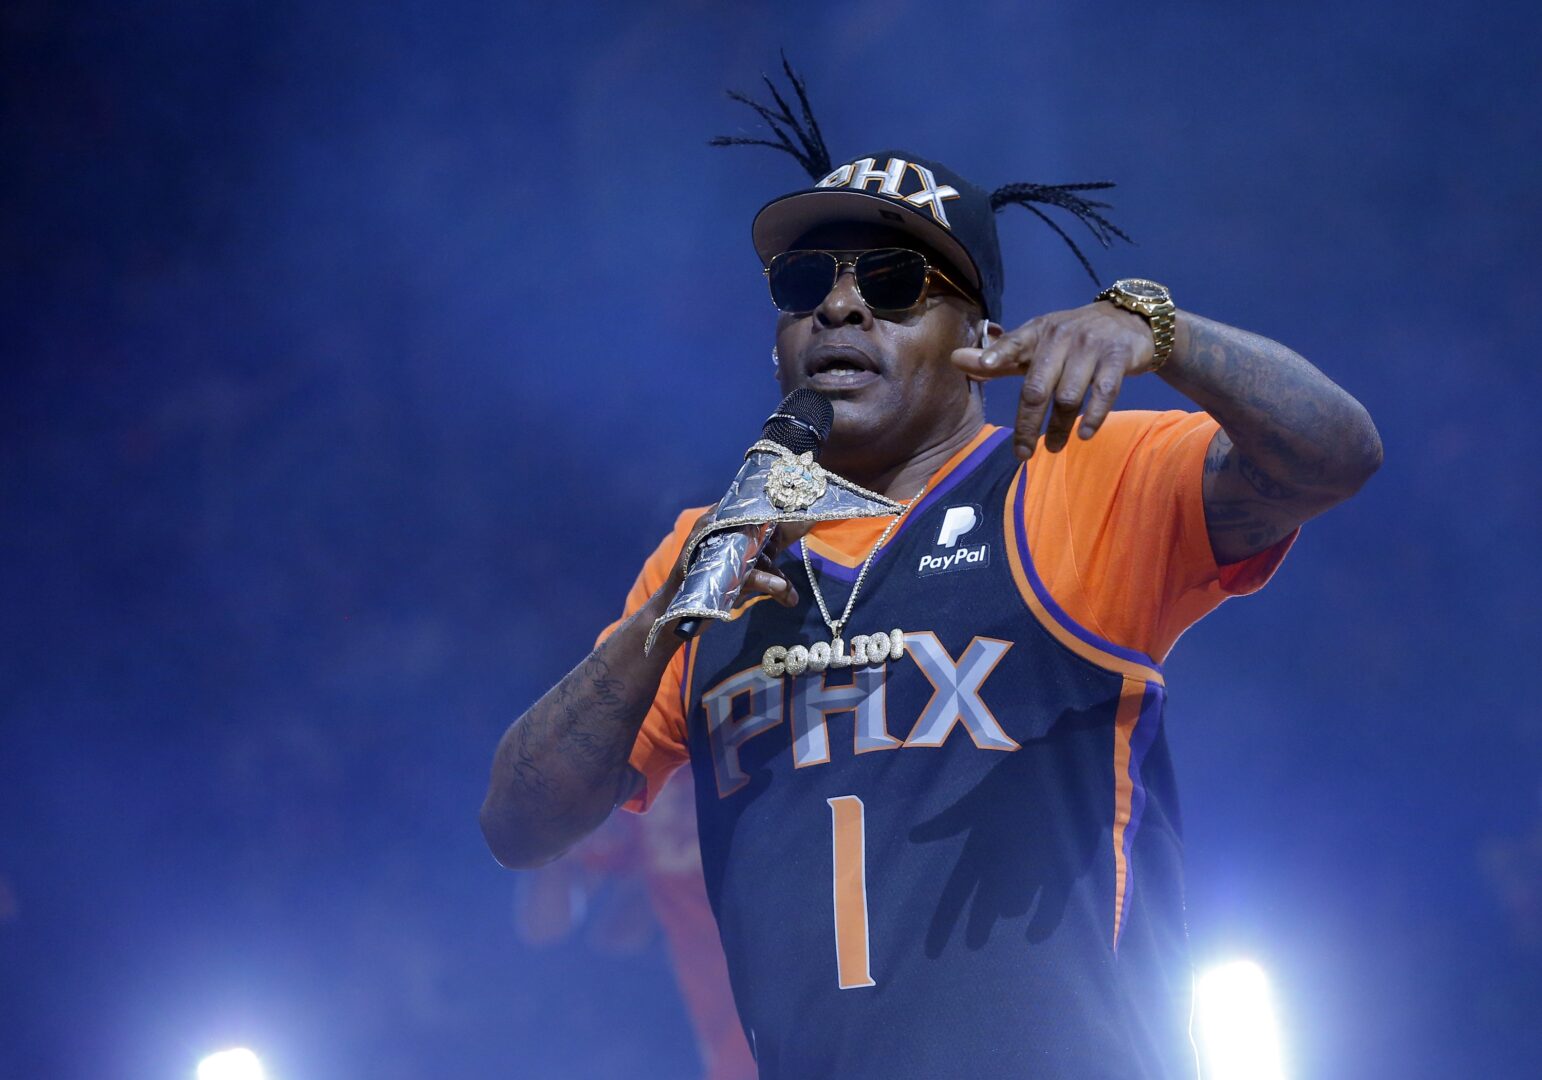  Coolio performs at halftime of an NBA basketball game between the Phoenix Suns and the New Orleans Pelicans on April 5, 2019, in Phoenix. 